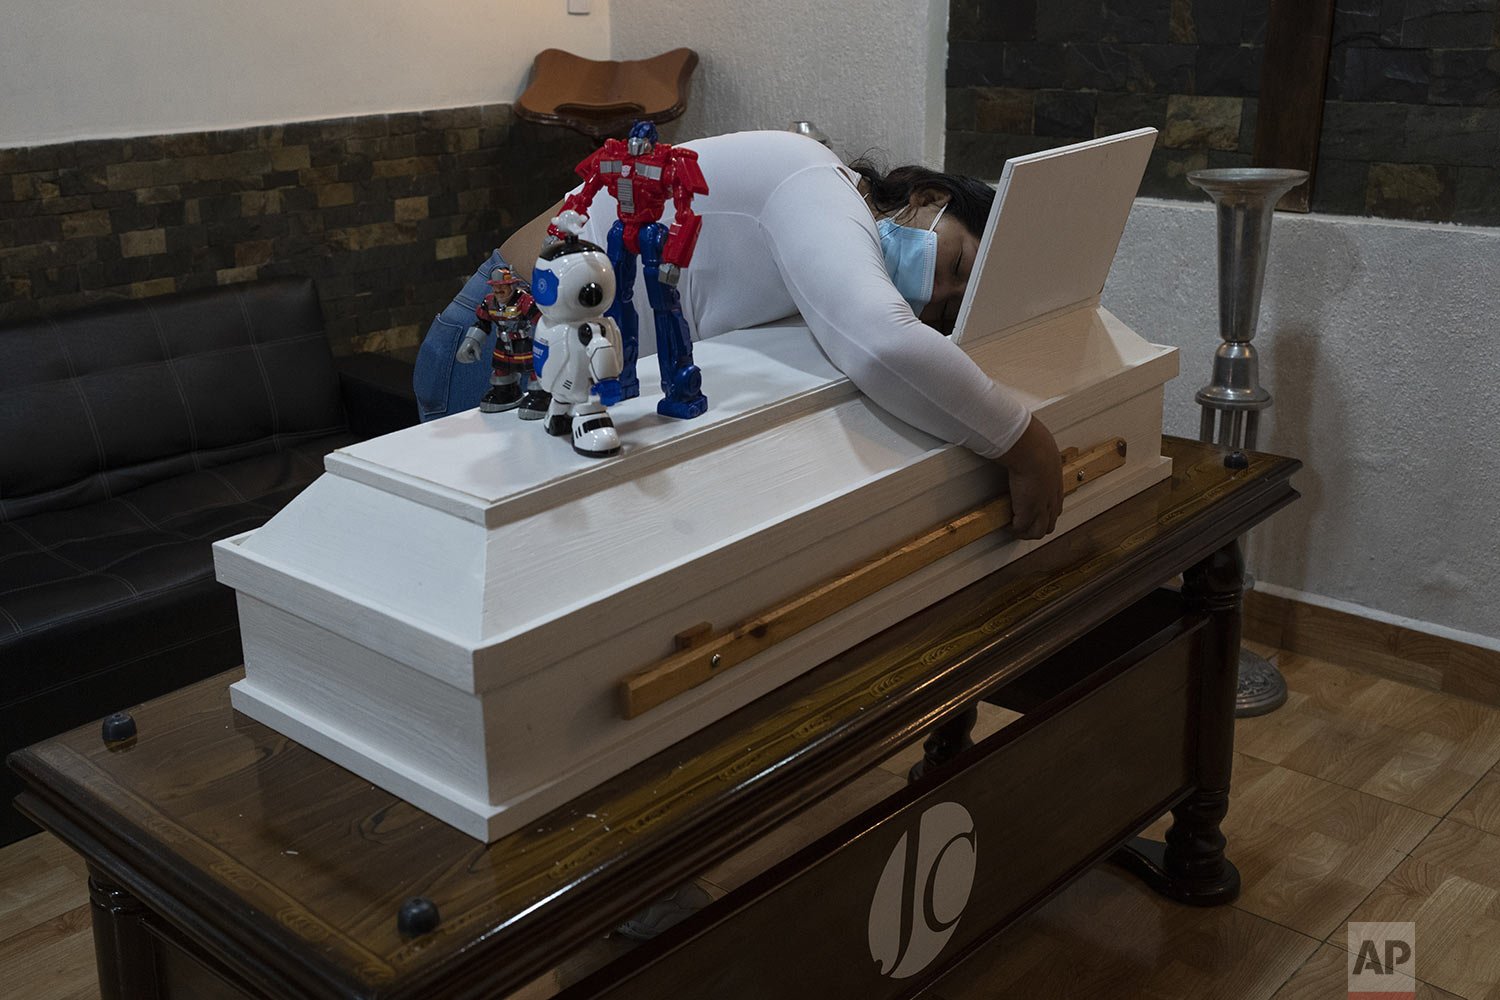  Julieres hugs the coffin of her 4-year-old son Joshue during his funeral service in Caracas, Venezuela, Oct 27, 2021. Joshue was on a list for a bone marrow transplant. (AP Photo/Ariana Cubillos) 